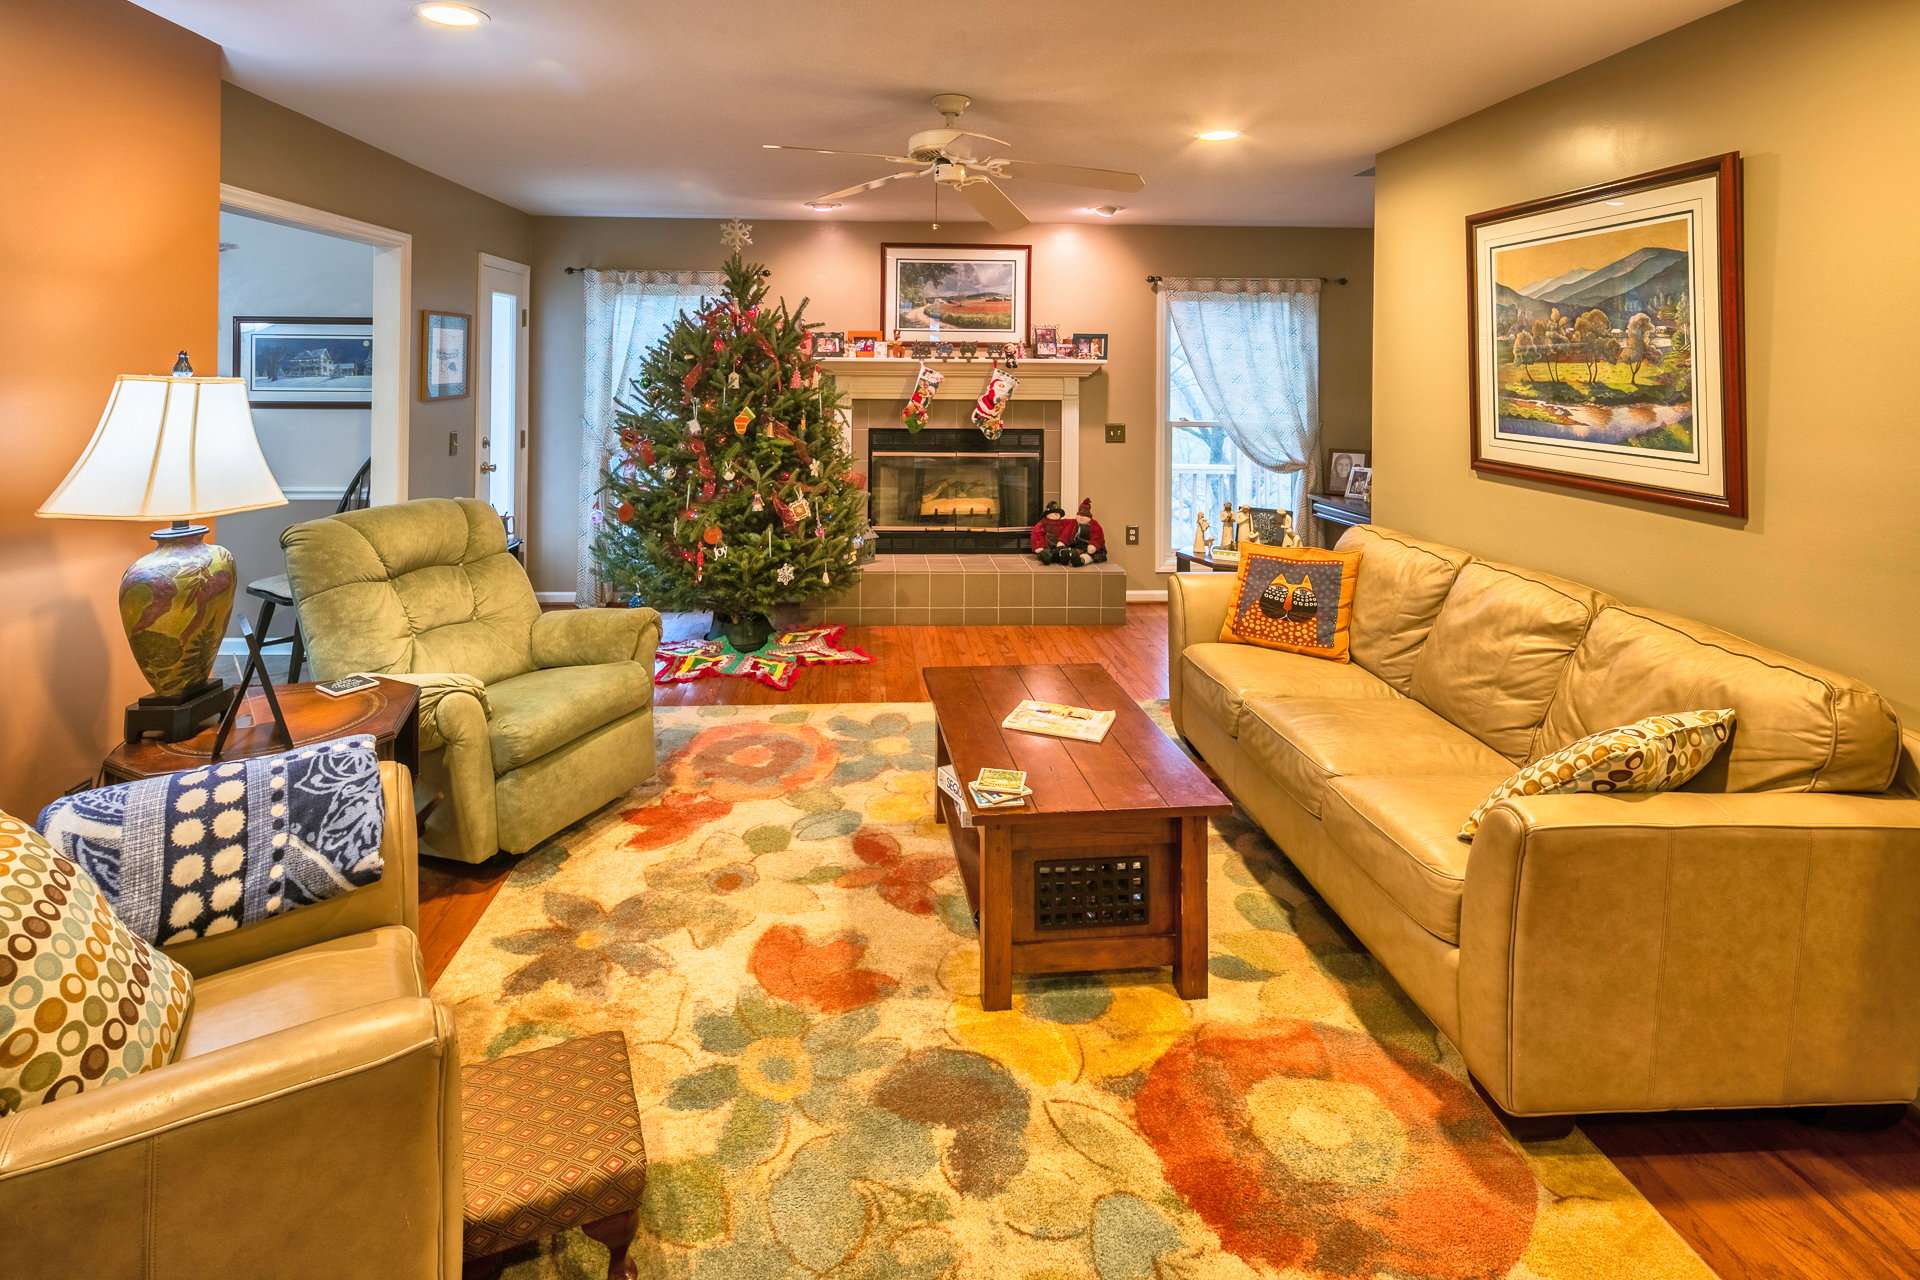 The living area welcomes you with warm and inviting spaces featuring wood floors and a fireplace with gas logs.